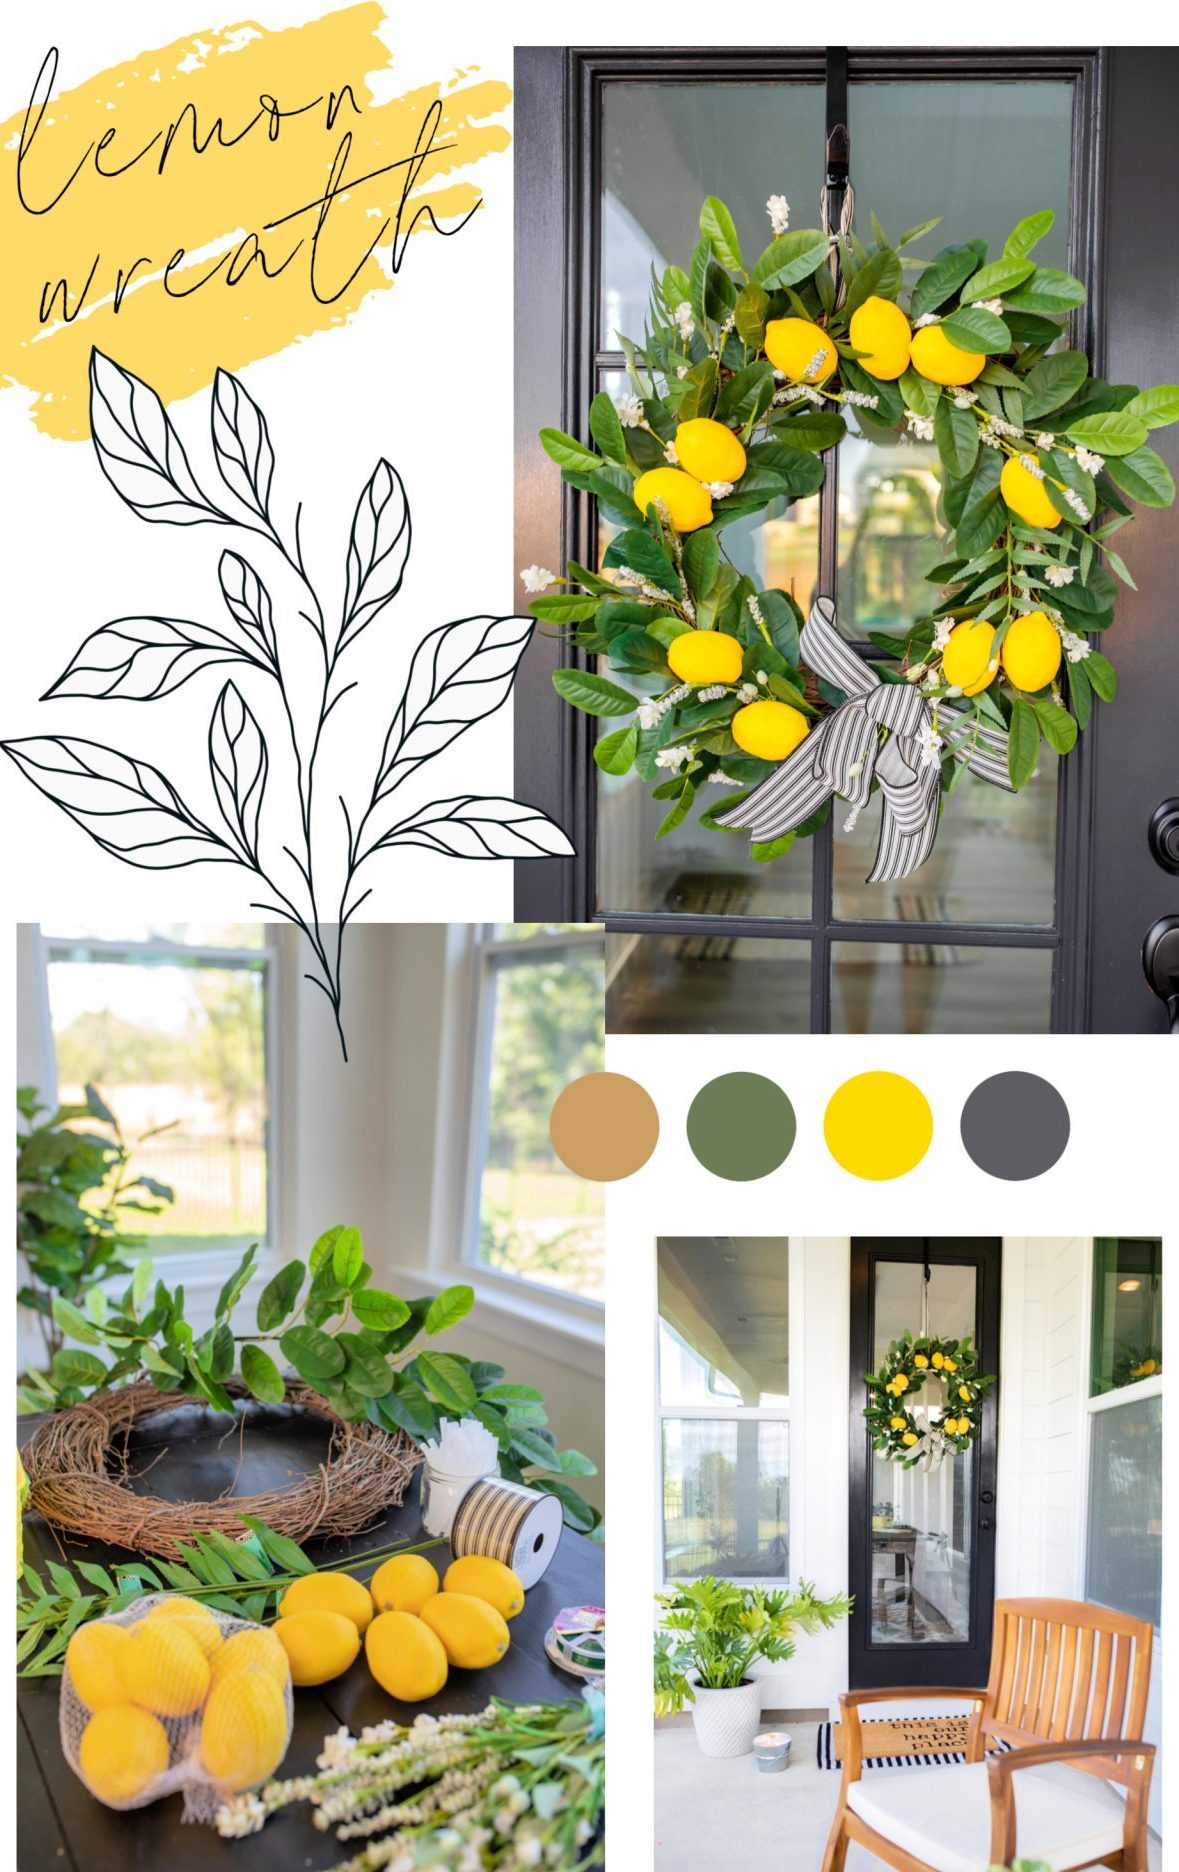 diy, wreath, summer decor, home design, front porch, lemon wreath, do it yourself, lemon wreath, lemon decor, how to make, crafts, how to, home, citrus, decoration